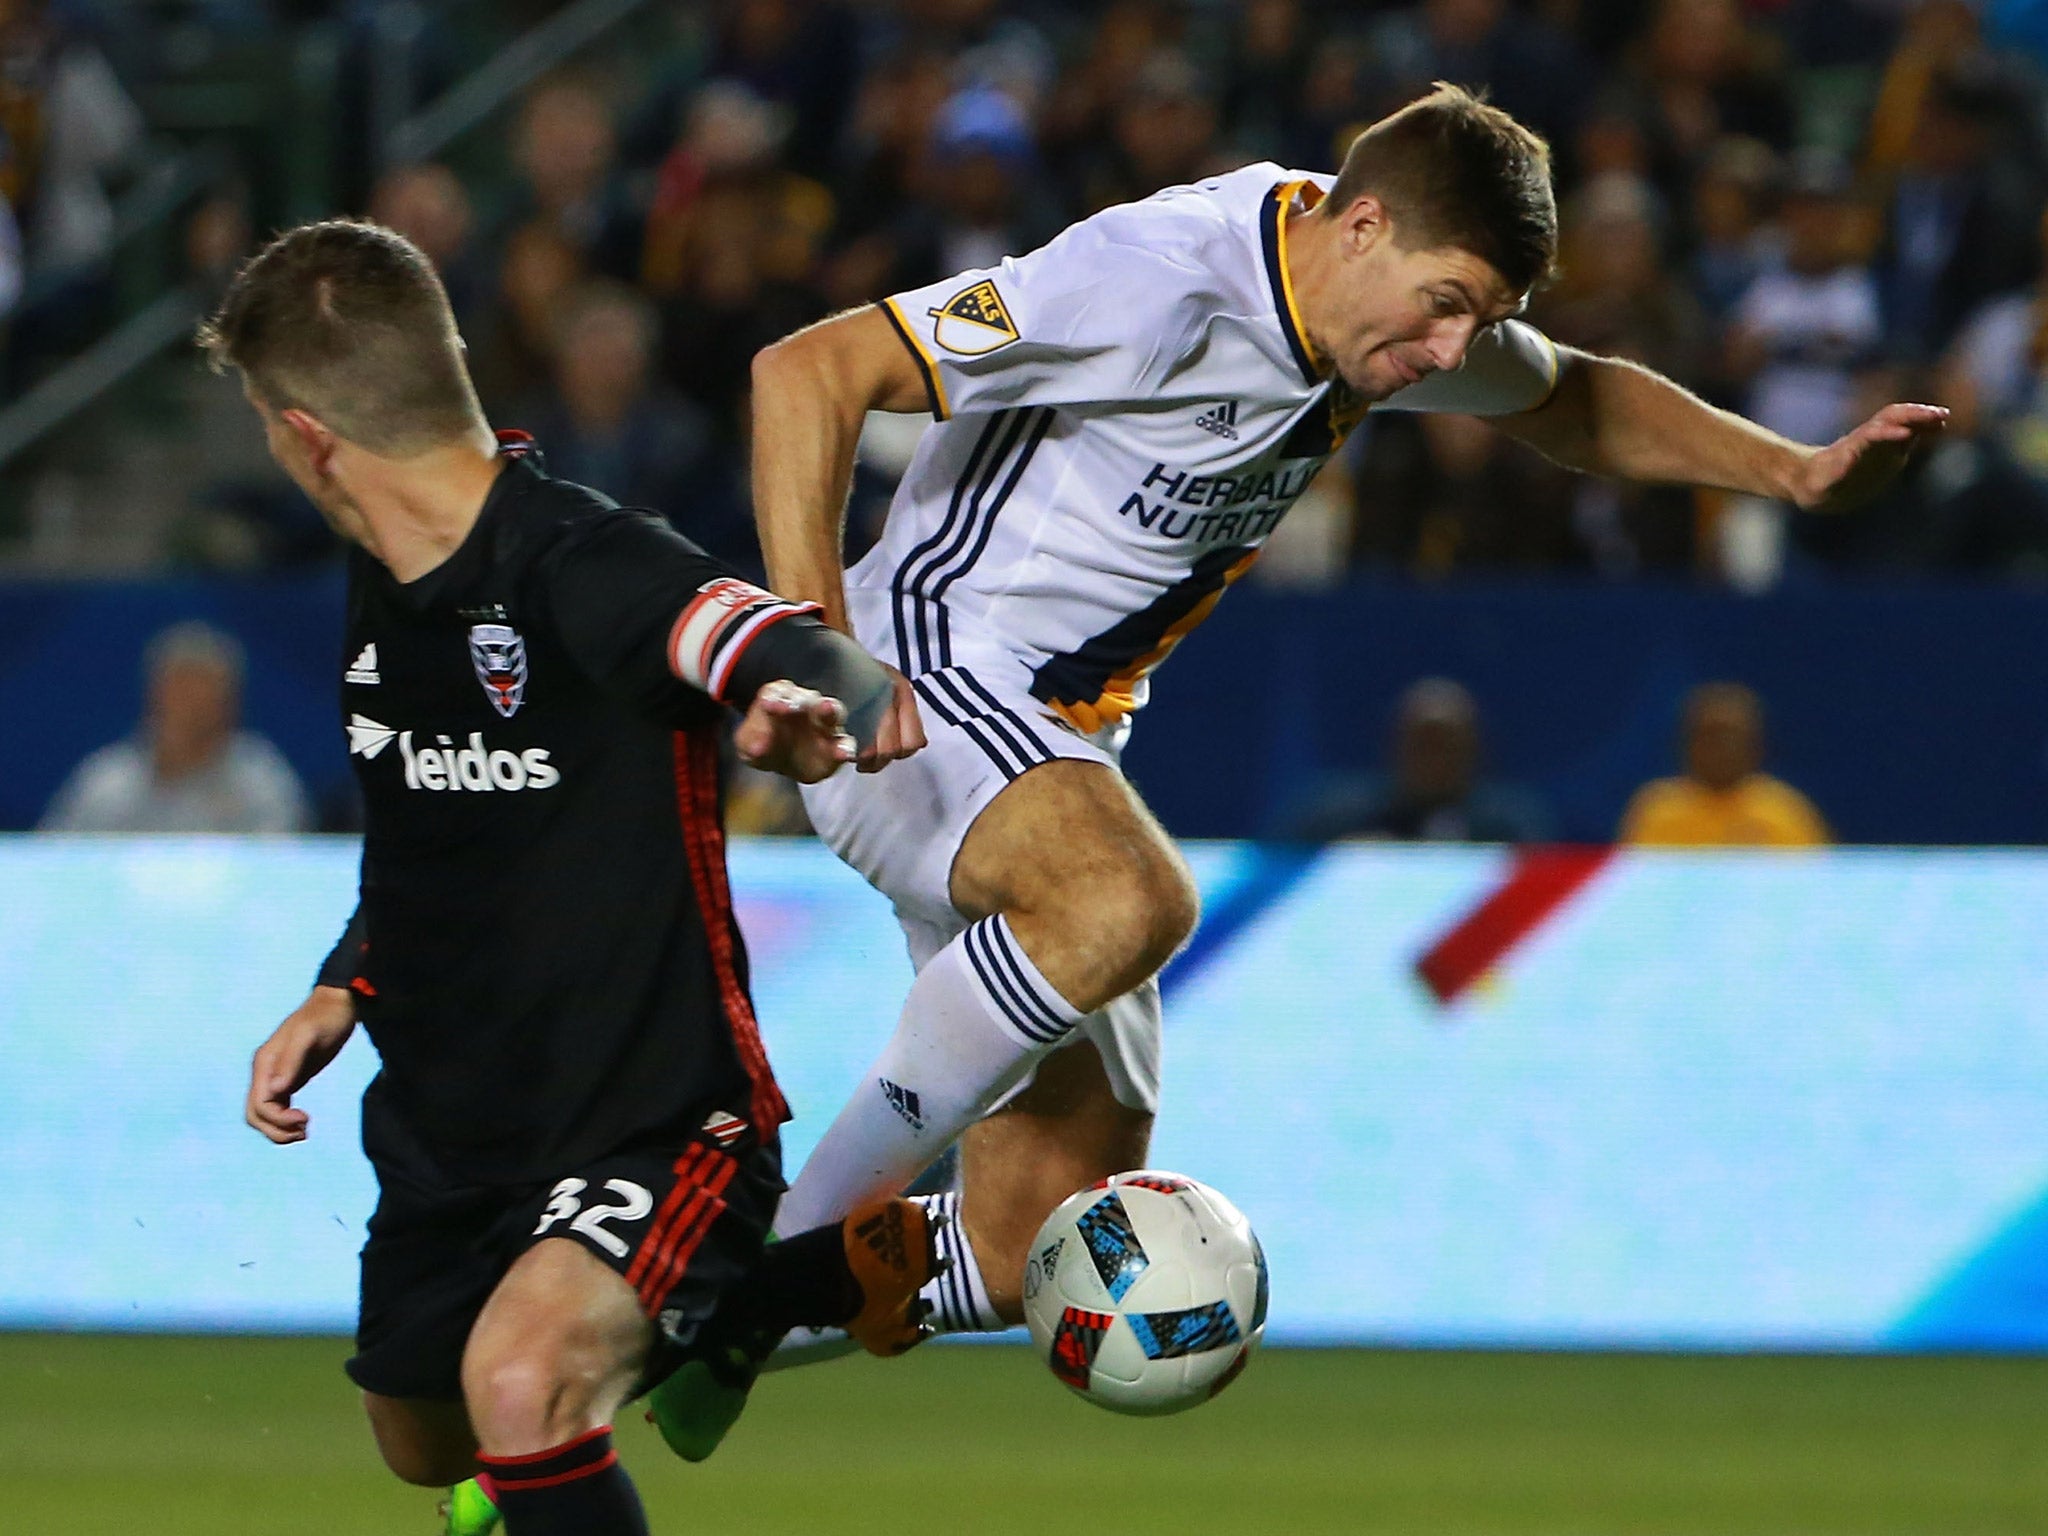 Gerrard has not enjoyed a strong spell in the MLS and could leave LA Galaxy at the end of the season